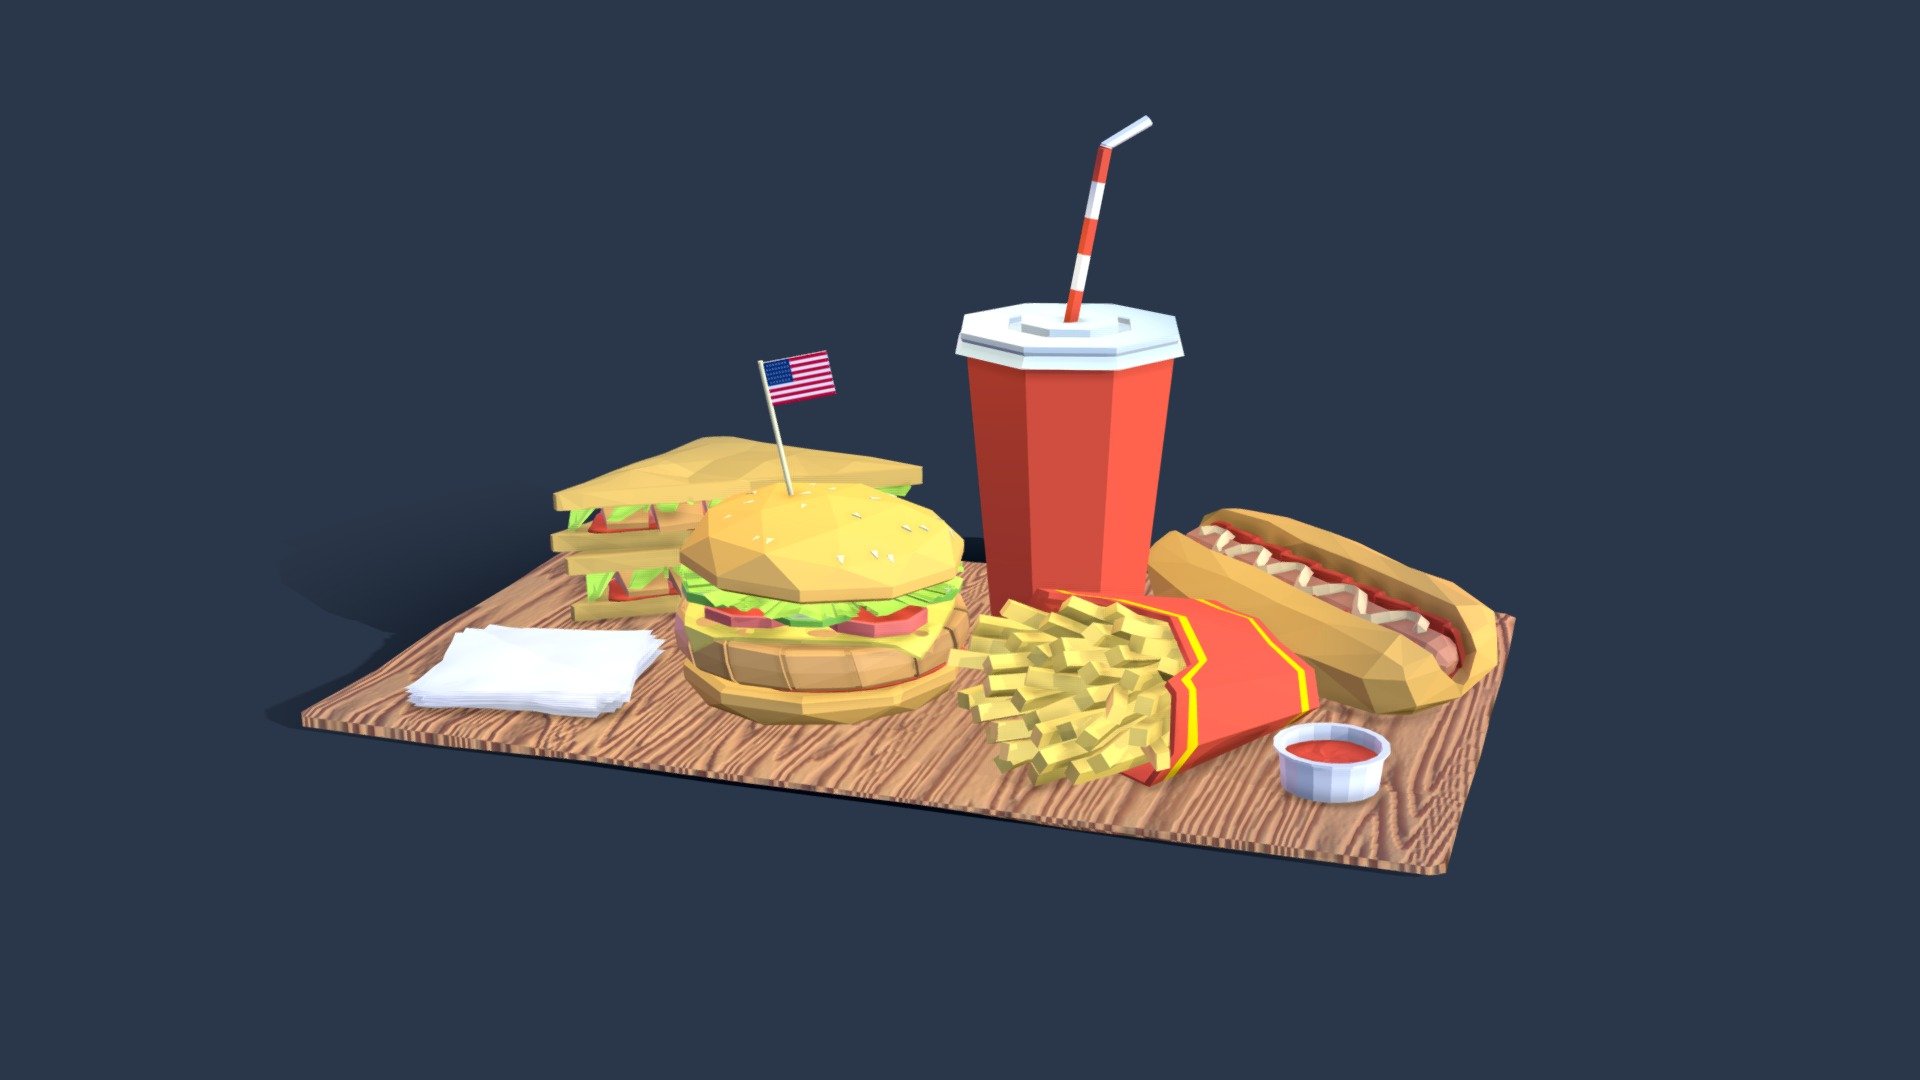 Cartoon Low Poly Food Pack Illustration

Asset include Burger, Drink Cup, Potato Free, Hot Dog, Sandwich, Sauce

Created on Cinema 4d R20

10 982 Polygons

Procedural Textured

Game Ready

AR/VR Ready
 - Cartoon Low Poly Fast Food Set - Buy Royalty Free 3D model by antonmoek 3d model